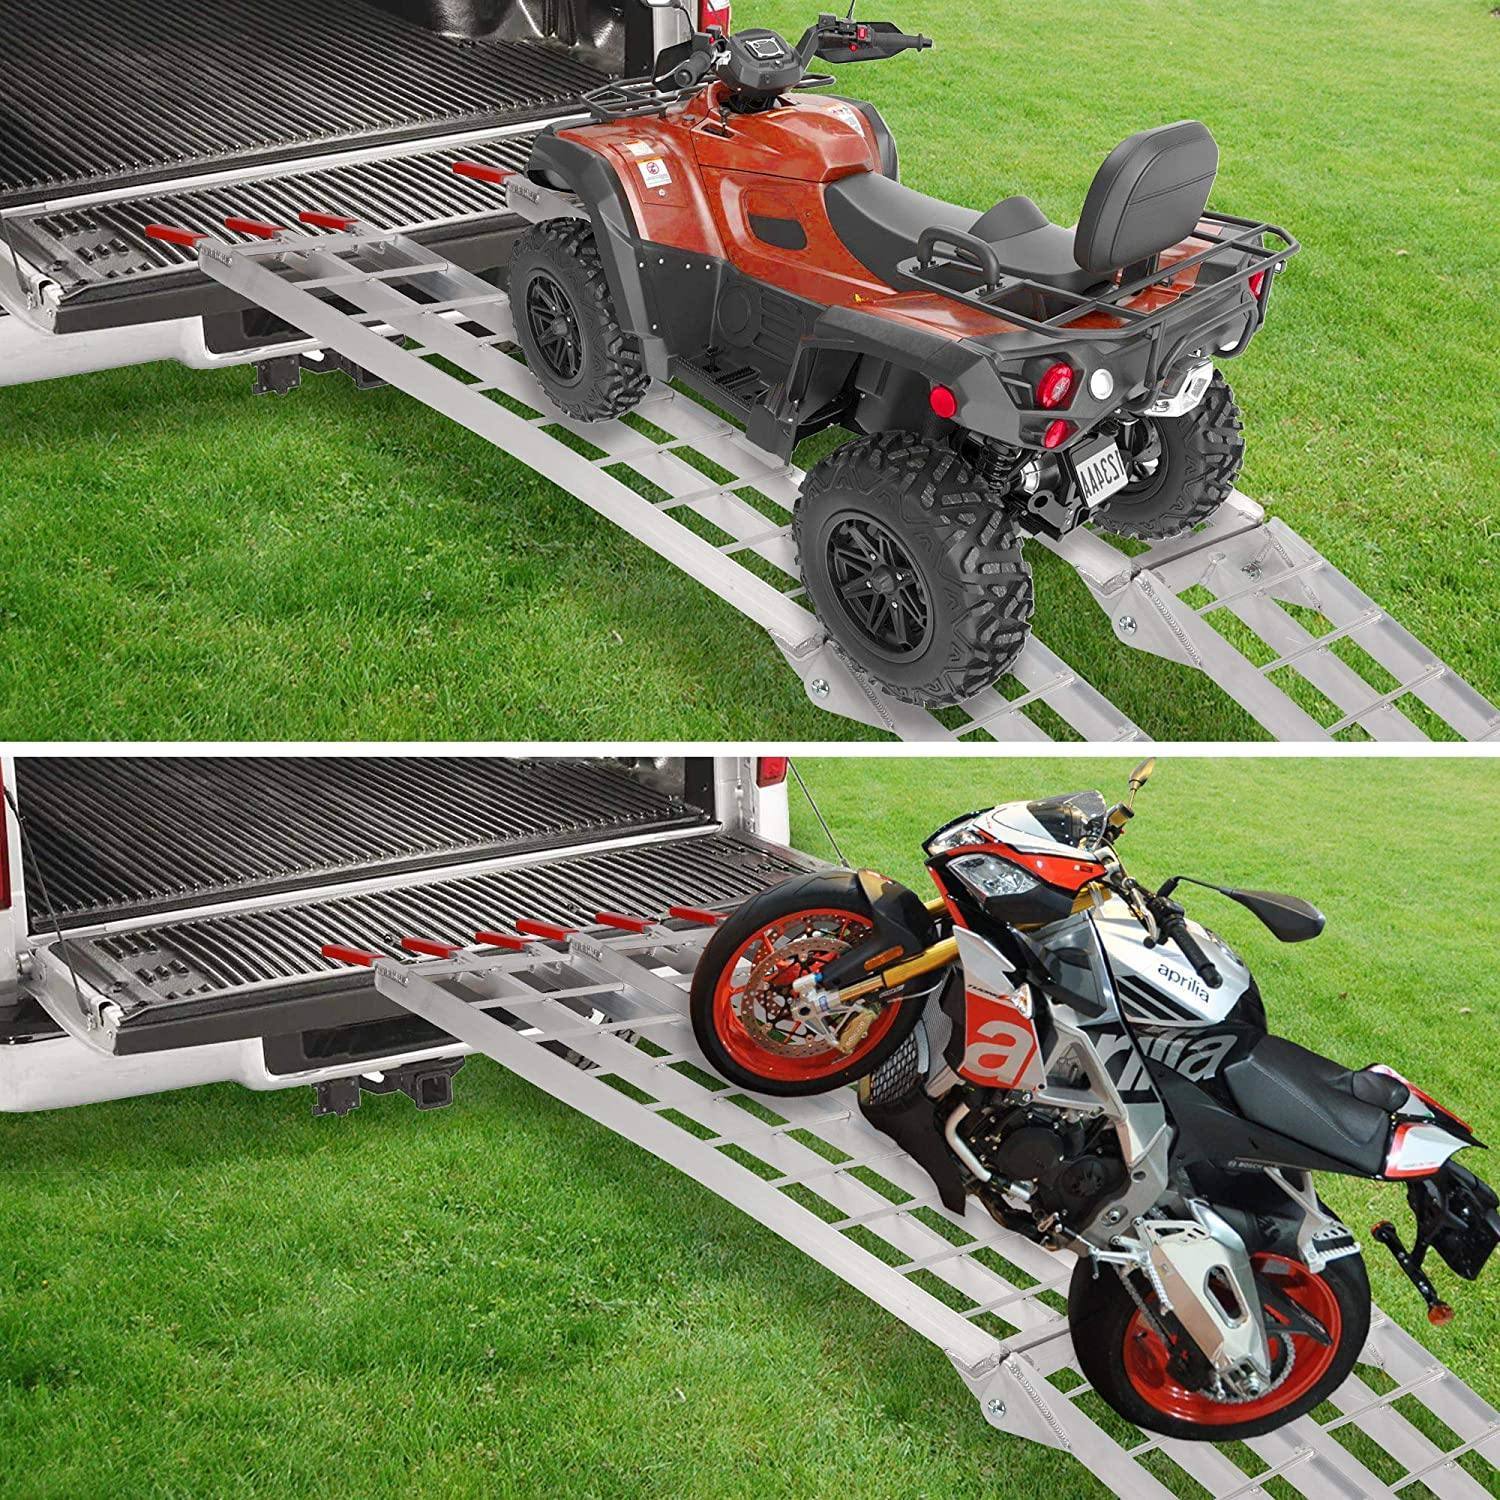 Bosonshop 2pcs Loading Ramp 7.5Ft-1500lbs Capacity Aluminum Foldable Truck Ramp Suitable for Motorcycle(Gridded 7.5Ft) - WoodPoly.com